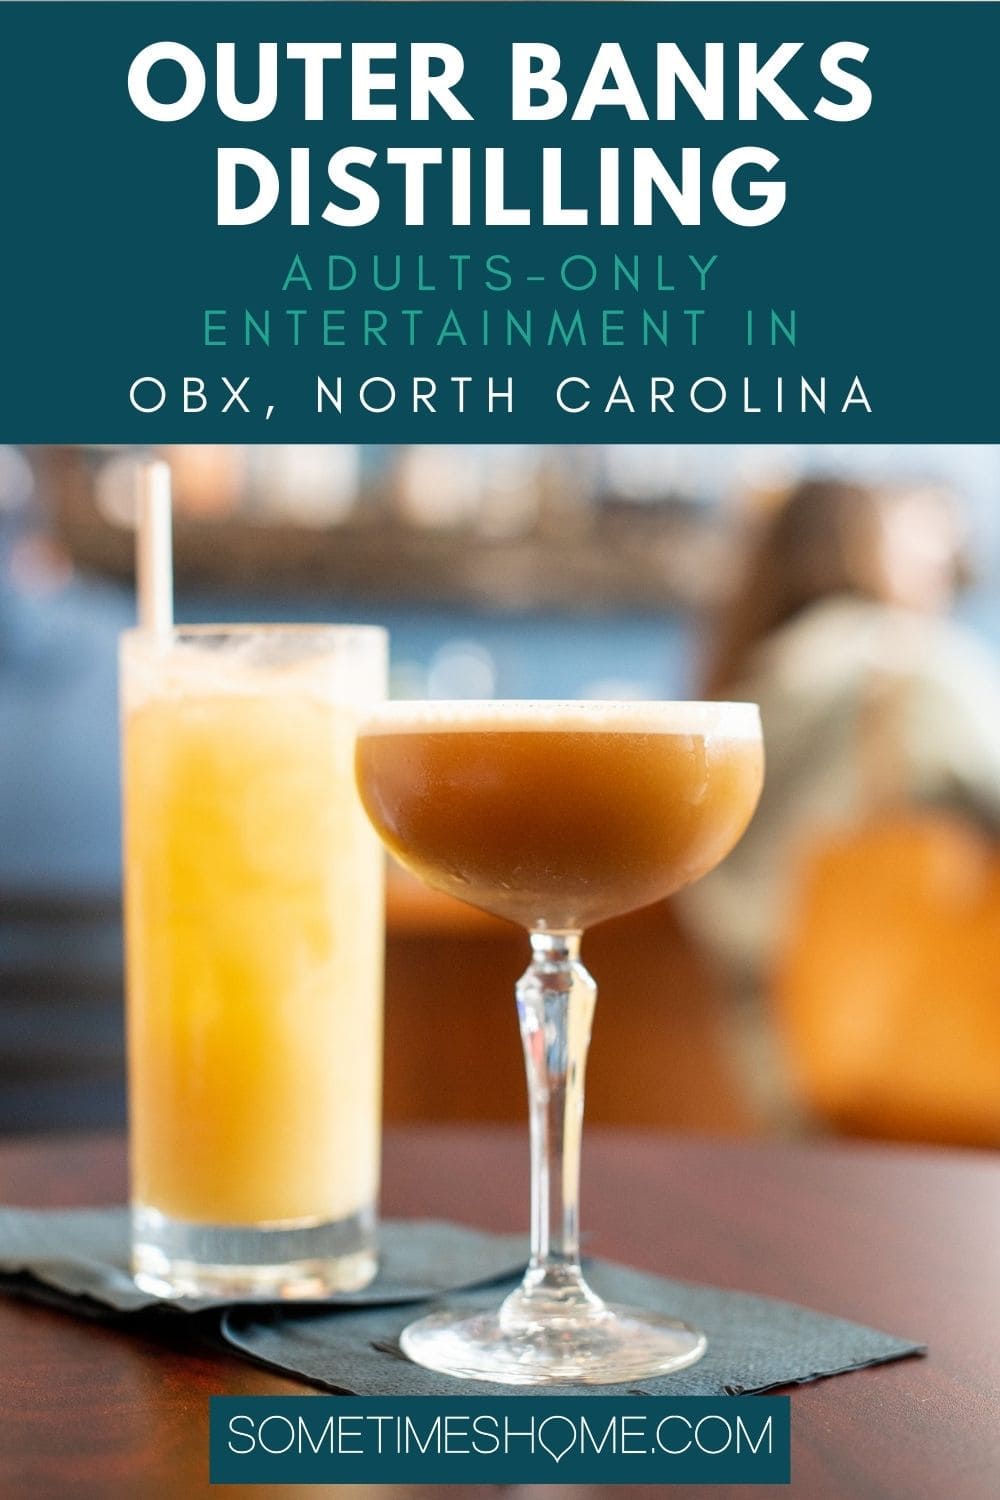 Pinterest image for Outer Banks Distilling Adults-Only Entertainment in OBX, North Carolina with a picture of two cocktails.